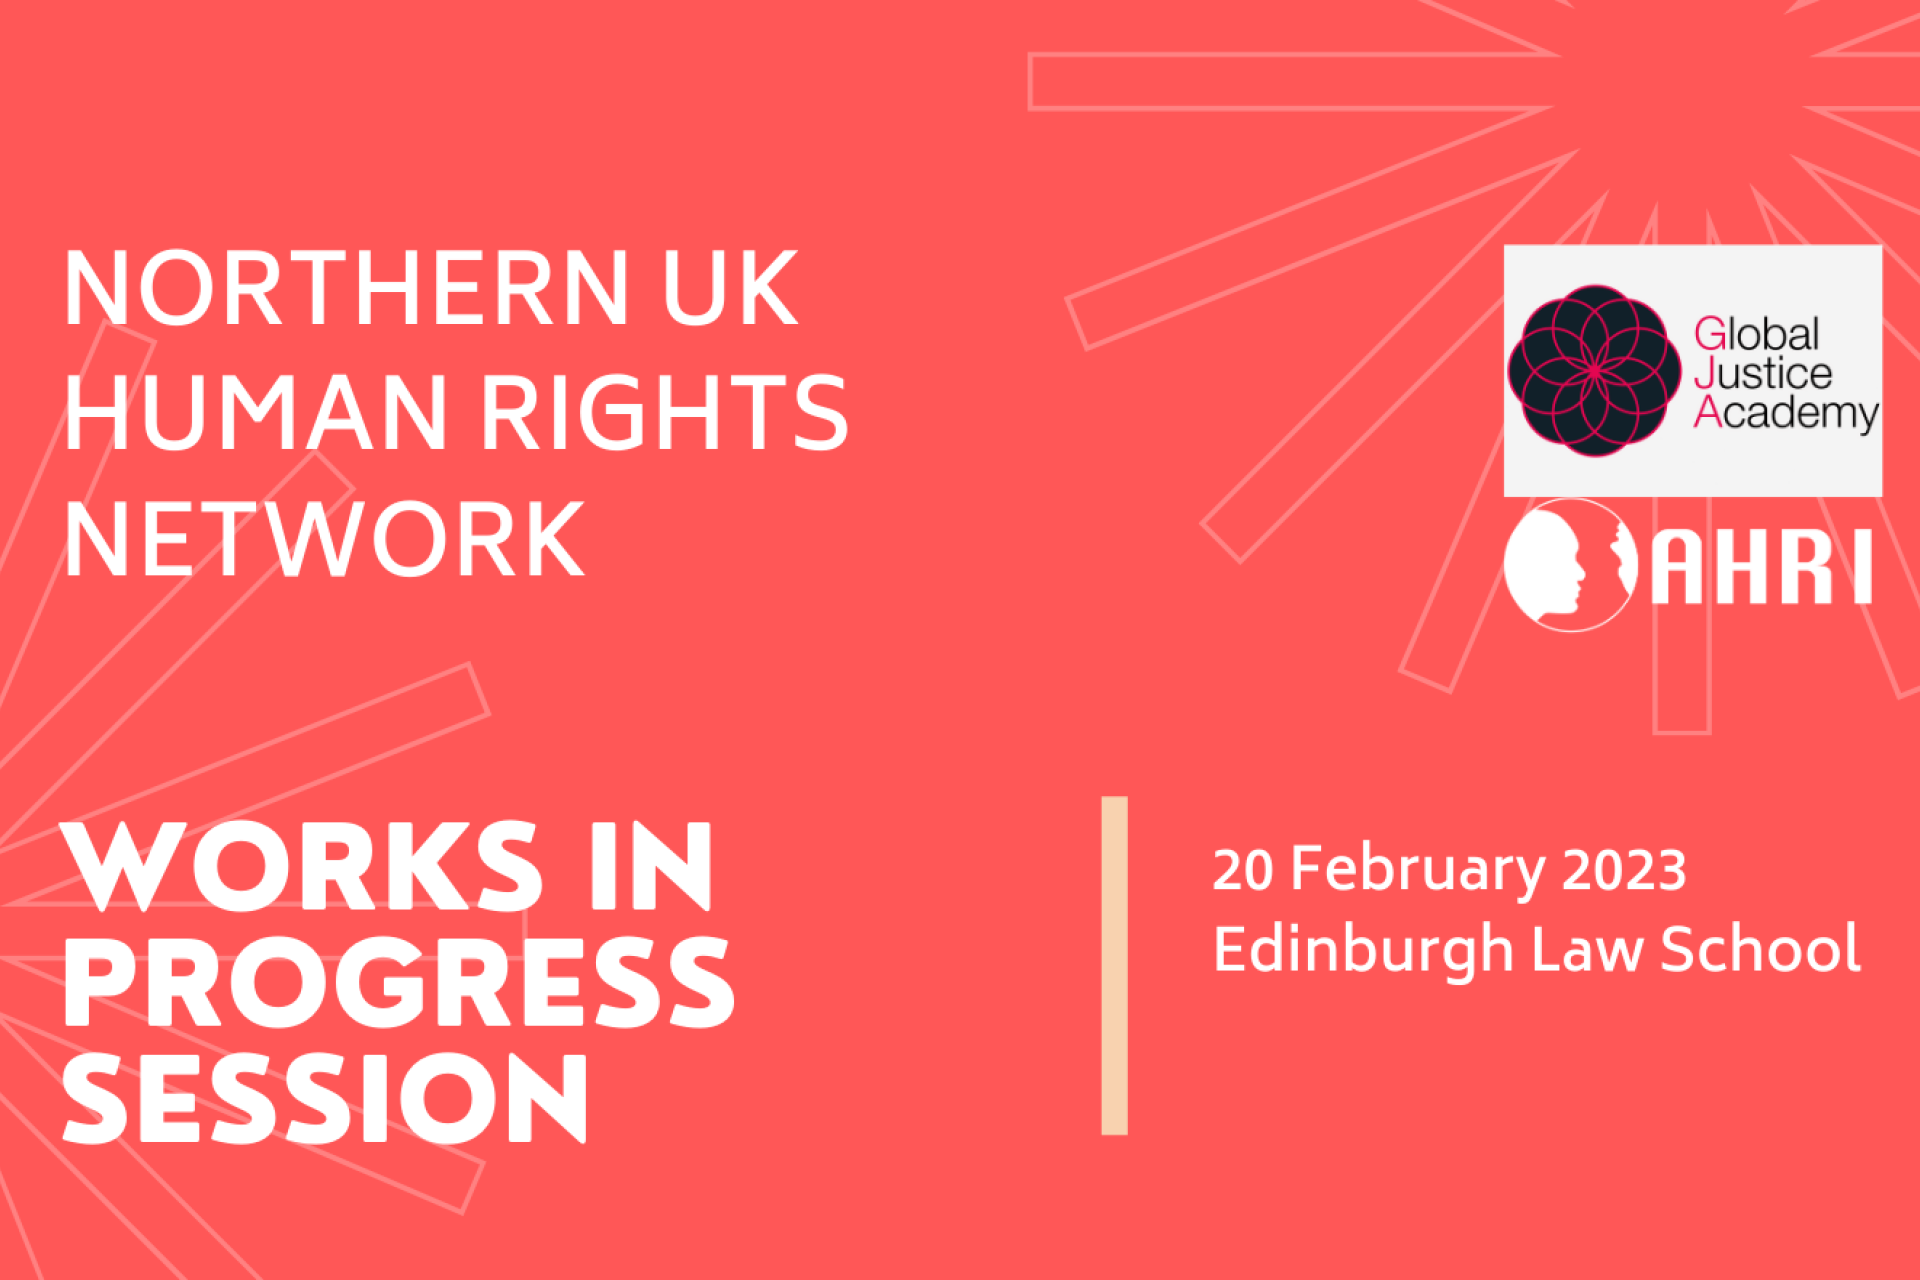 Northern UK Human Rights Network Works in Progress Session 